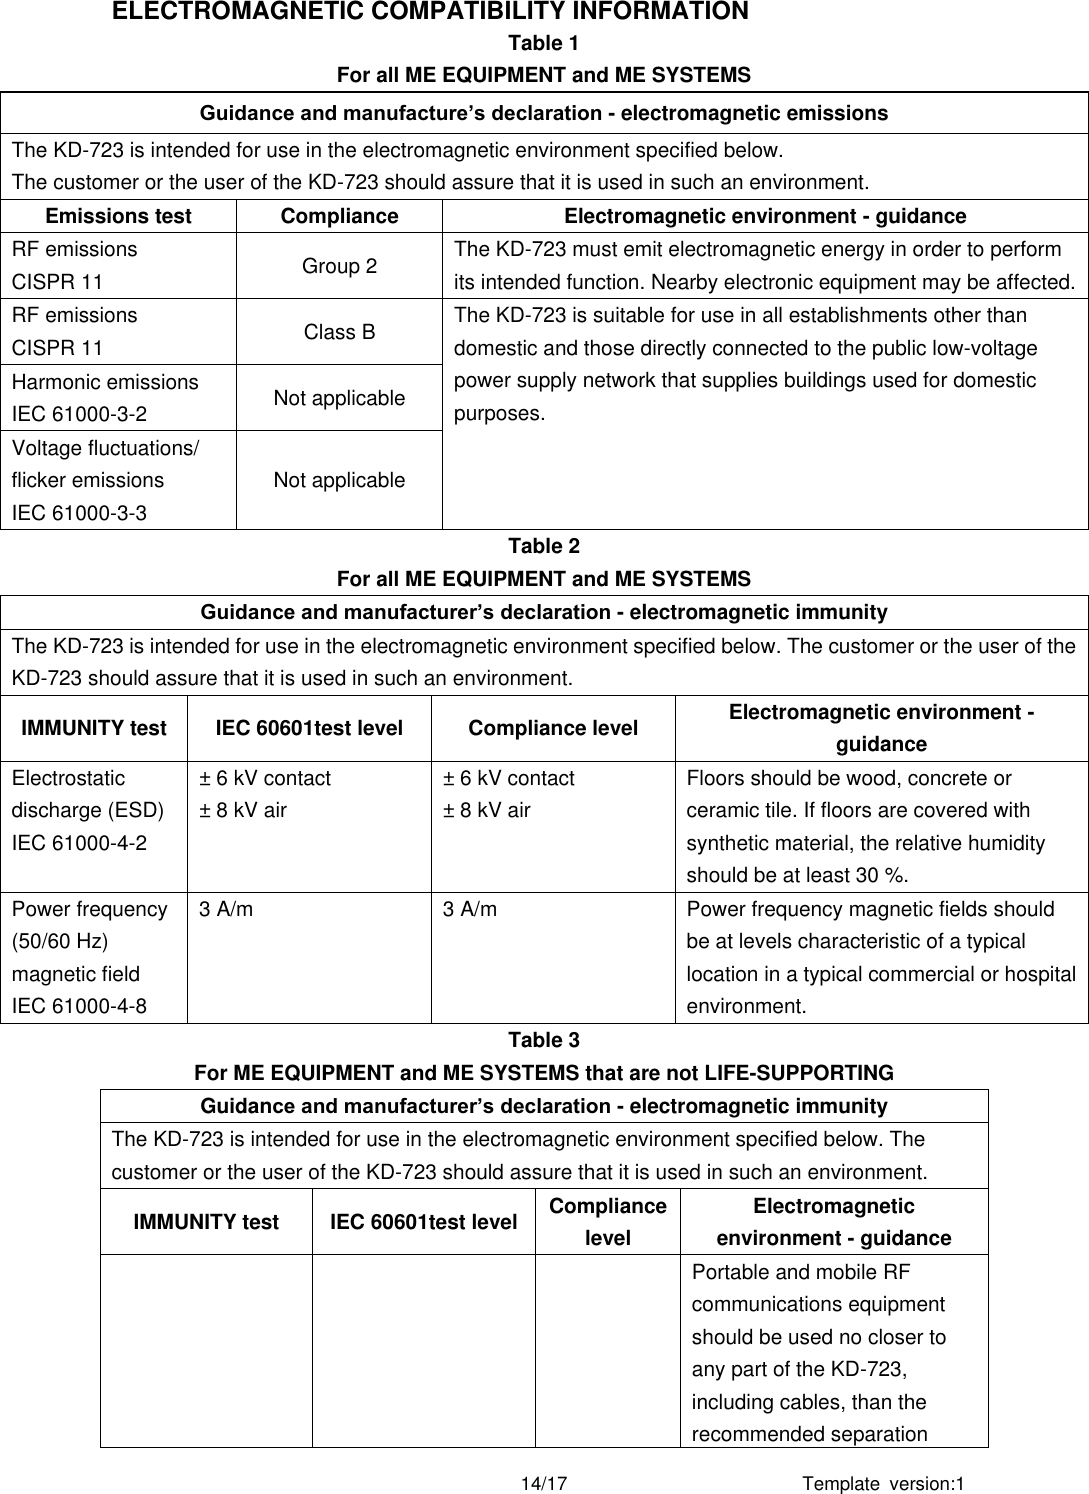 Template  version:1 14/17 ELECTROMAGNETIC COMPATIBILITY INFORMATION Table 1 For all ME EQUIPMENT and ME SYSTEMS Guidance and manufacture’s declaration - electromagnetic emissions The KD-723 is intended for use in the electromagnetic environment specified below. The customer or the user of the KD-723 should assure that it is used in such an environment. Emissions test Compliance Electromagnetic environment - guidance RF emissions CISPR 11 Group 2 The KD-723 must emit electromagnetic energy in order to perform its intended function. Nearby electronic equipment may be affected. RF emissions CISPR 11 Class B The KD-723 is suitable for use in all establishments other than domestic and those directly connected to the public low-voltage power supply network that supplies buildings used for domestic purposes.  Harmonic emissions IEC 61000-3-2 Not applicable Voltage fluctuations/ flicker emissions IEC 61000-3-3 Not applicable Table 2 For all ME EQUIPMENT and ME SYSTEMS Guidance and manufacturer’s declaration - electromagnetic immunity The KD-723 is intended for use in the electromagnetic environment specified below. The customer or the user of the KD-723 should assure that it is used in such an environment. IMMUNITY test IEC 60601test level Compliance level Electromagnetic environment - guidance Electrostatic discharge (ESD) IEC 61000-4-2 ± 6 kV contact ± 8 kV air ± 6 kV contact ± 8 kV air Floors should be wood, concrete or ceramic tile. If floors are covered with synthetic material, the relative humidity should be at least 30 %. Power frequency (50/60 Hz) magnetic field IEC 61000-4-8 3 A/m 3 A/m Power frequency magnetic fields should be at levels characteristic of a typical location in a typical commercial or hospital environment. Table 3 For ME EQUIPMENT and ME SYSTEMS that are not LIFE-SUPPORTING Guidance and manufacturer’s declaration - electromagnetic immunity The KD-723 is intended for use in the electromagnetic environment specified below. The customer or the user of the KD-723 should assure that it is used in such an environment. IMMUNITY test IEC 60601test level Compliance level Electromagnetic environment - guidance                   Portable and mobile RF communications equipment should be used no closer to any part of the KD-723, including cables, than the recommended separation 